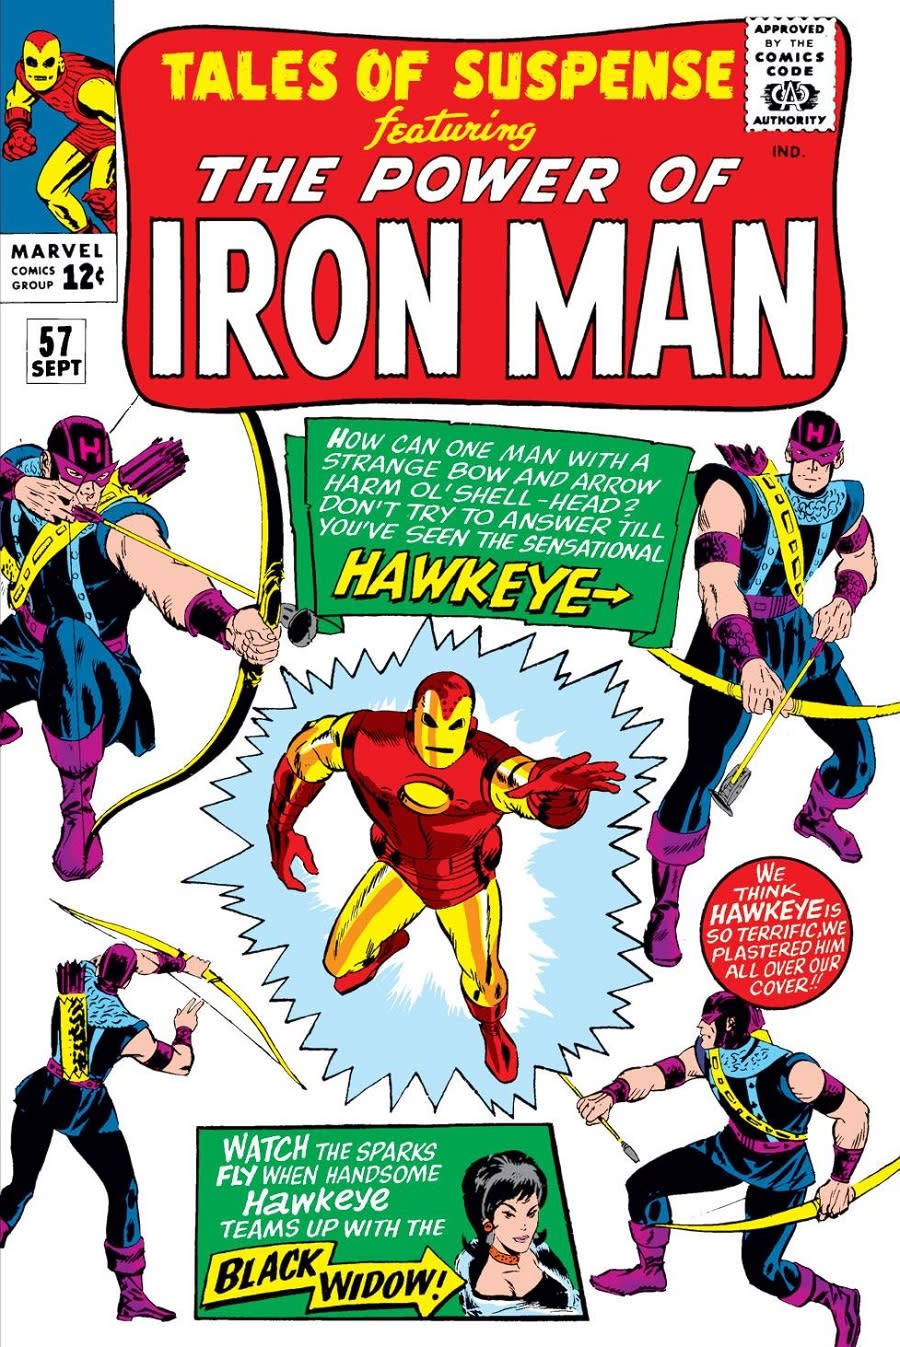 Tales of Suspense #57, the first appearance of Hawkeye.